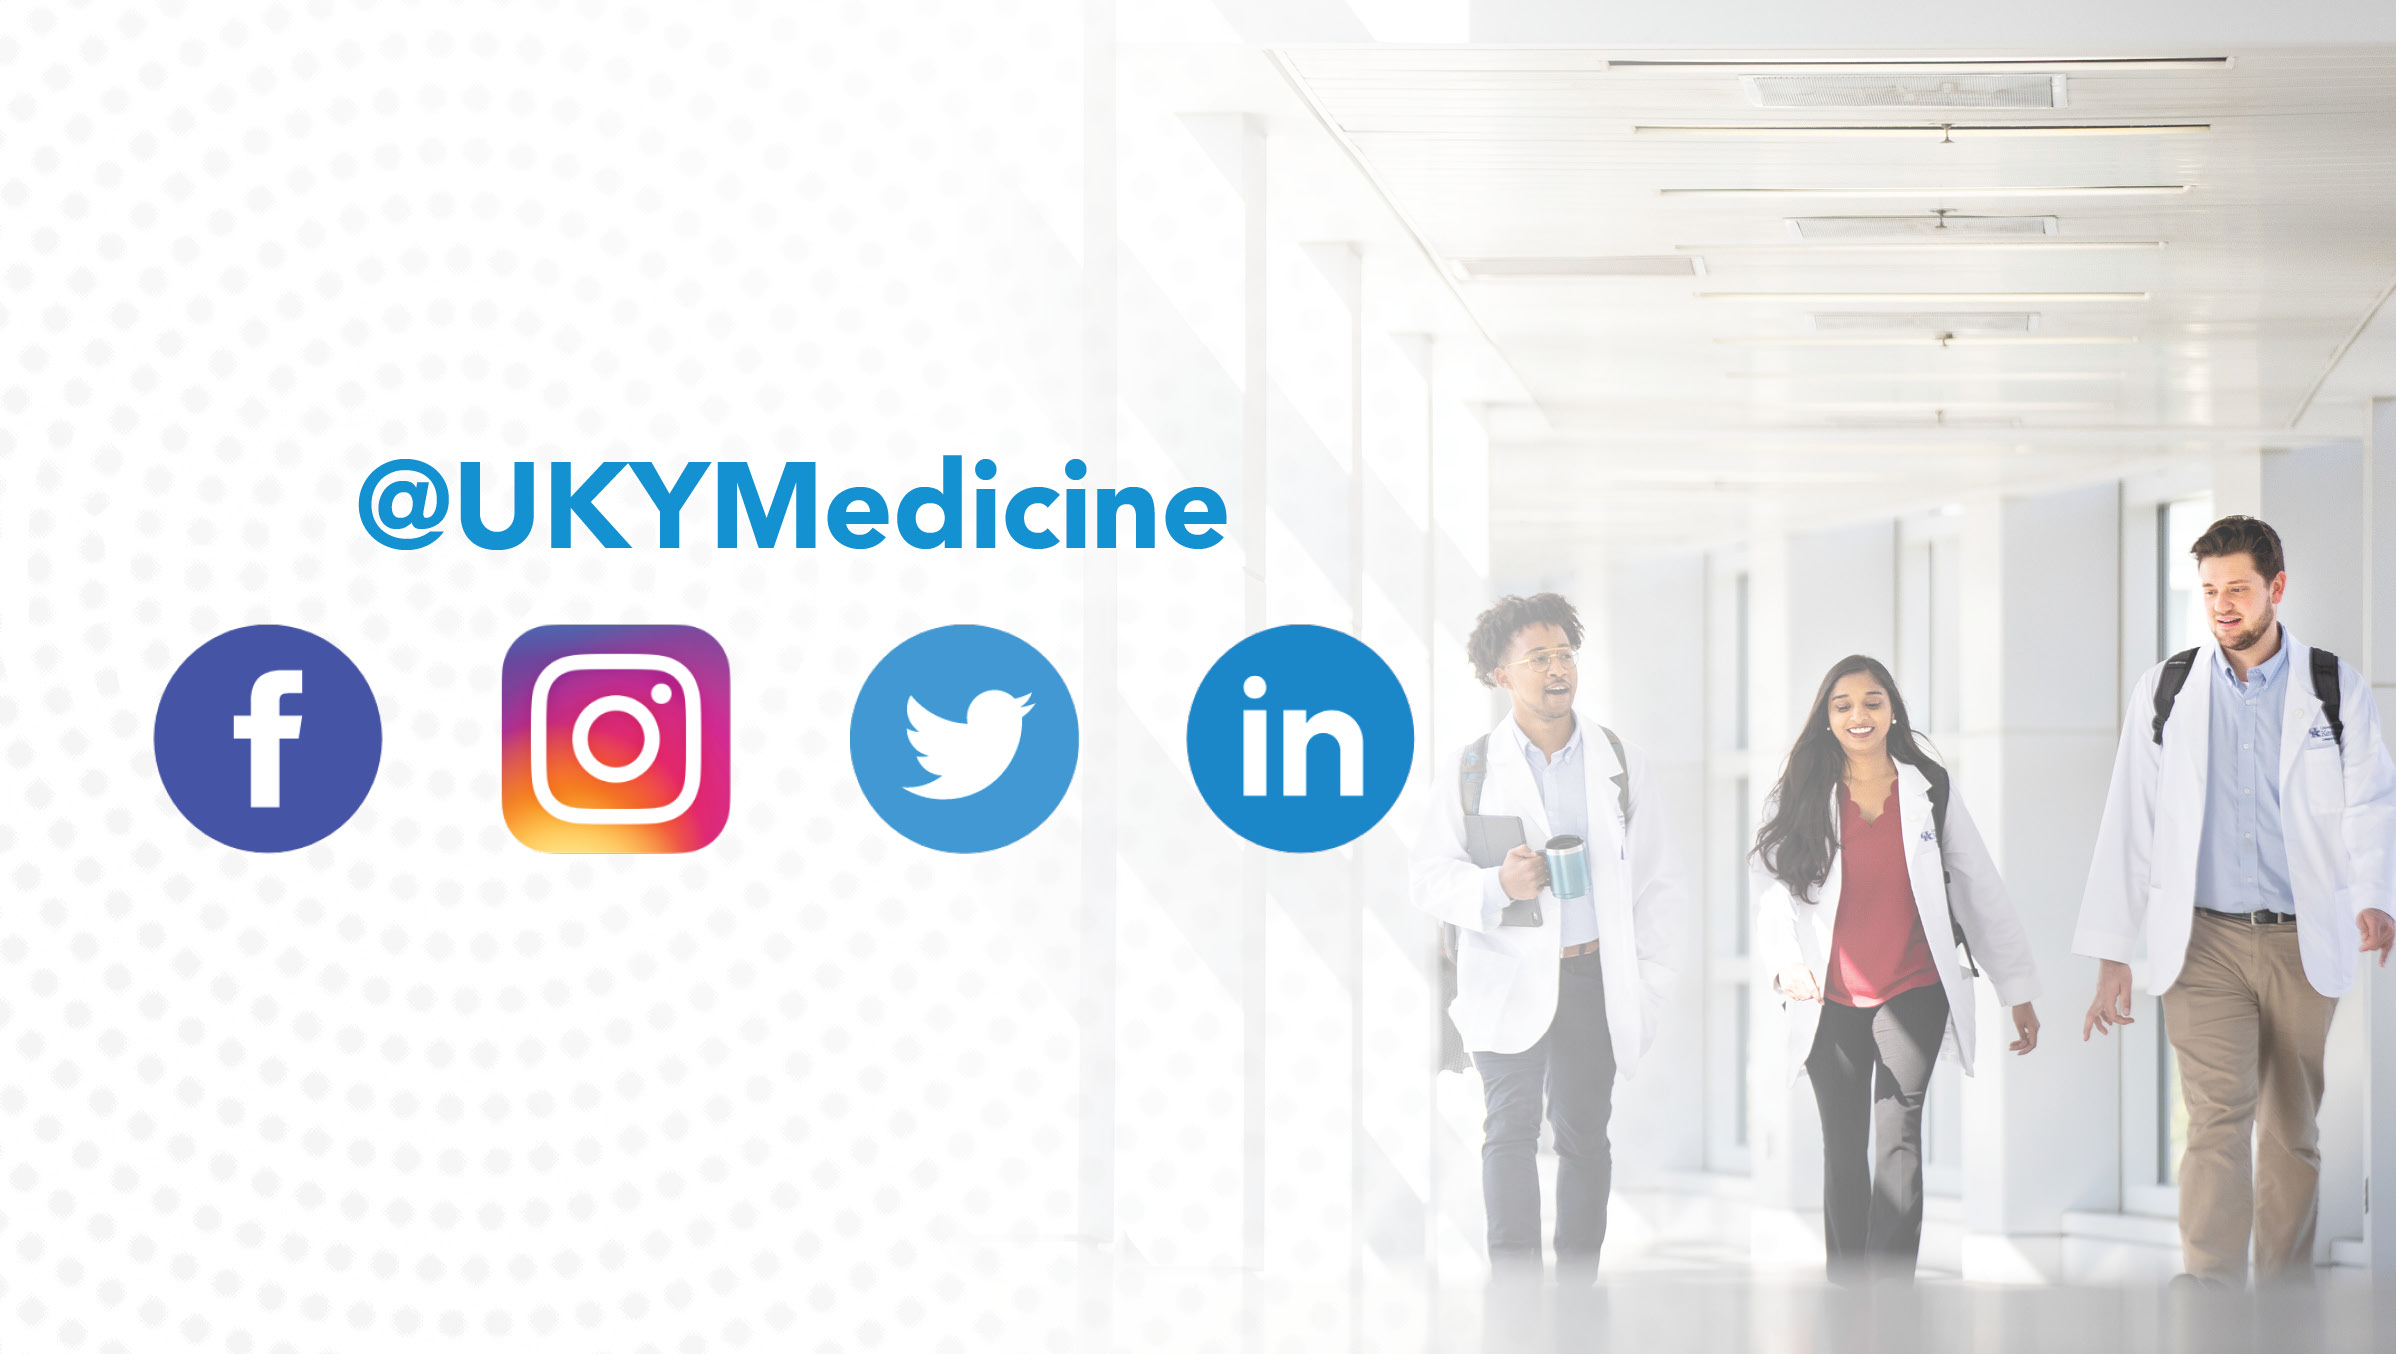 College of Medicine social media handle is @ukymedicine and you can find us on Facebook, Instagram, Twitter, and LinkedIn